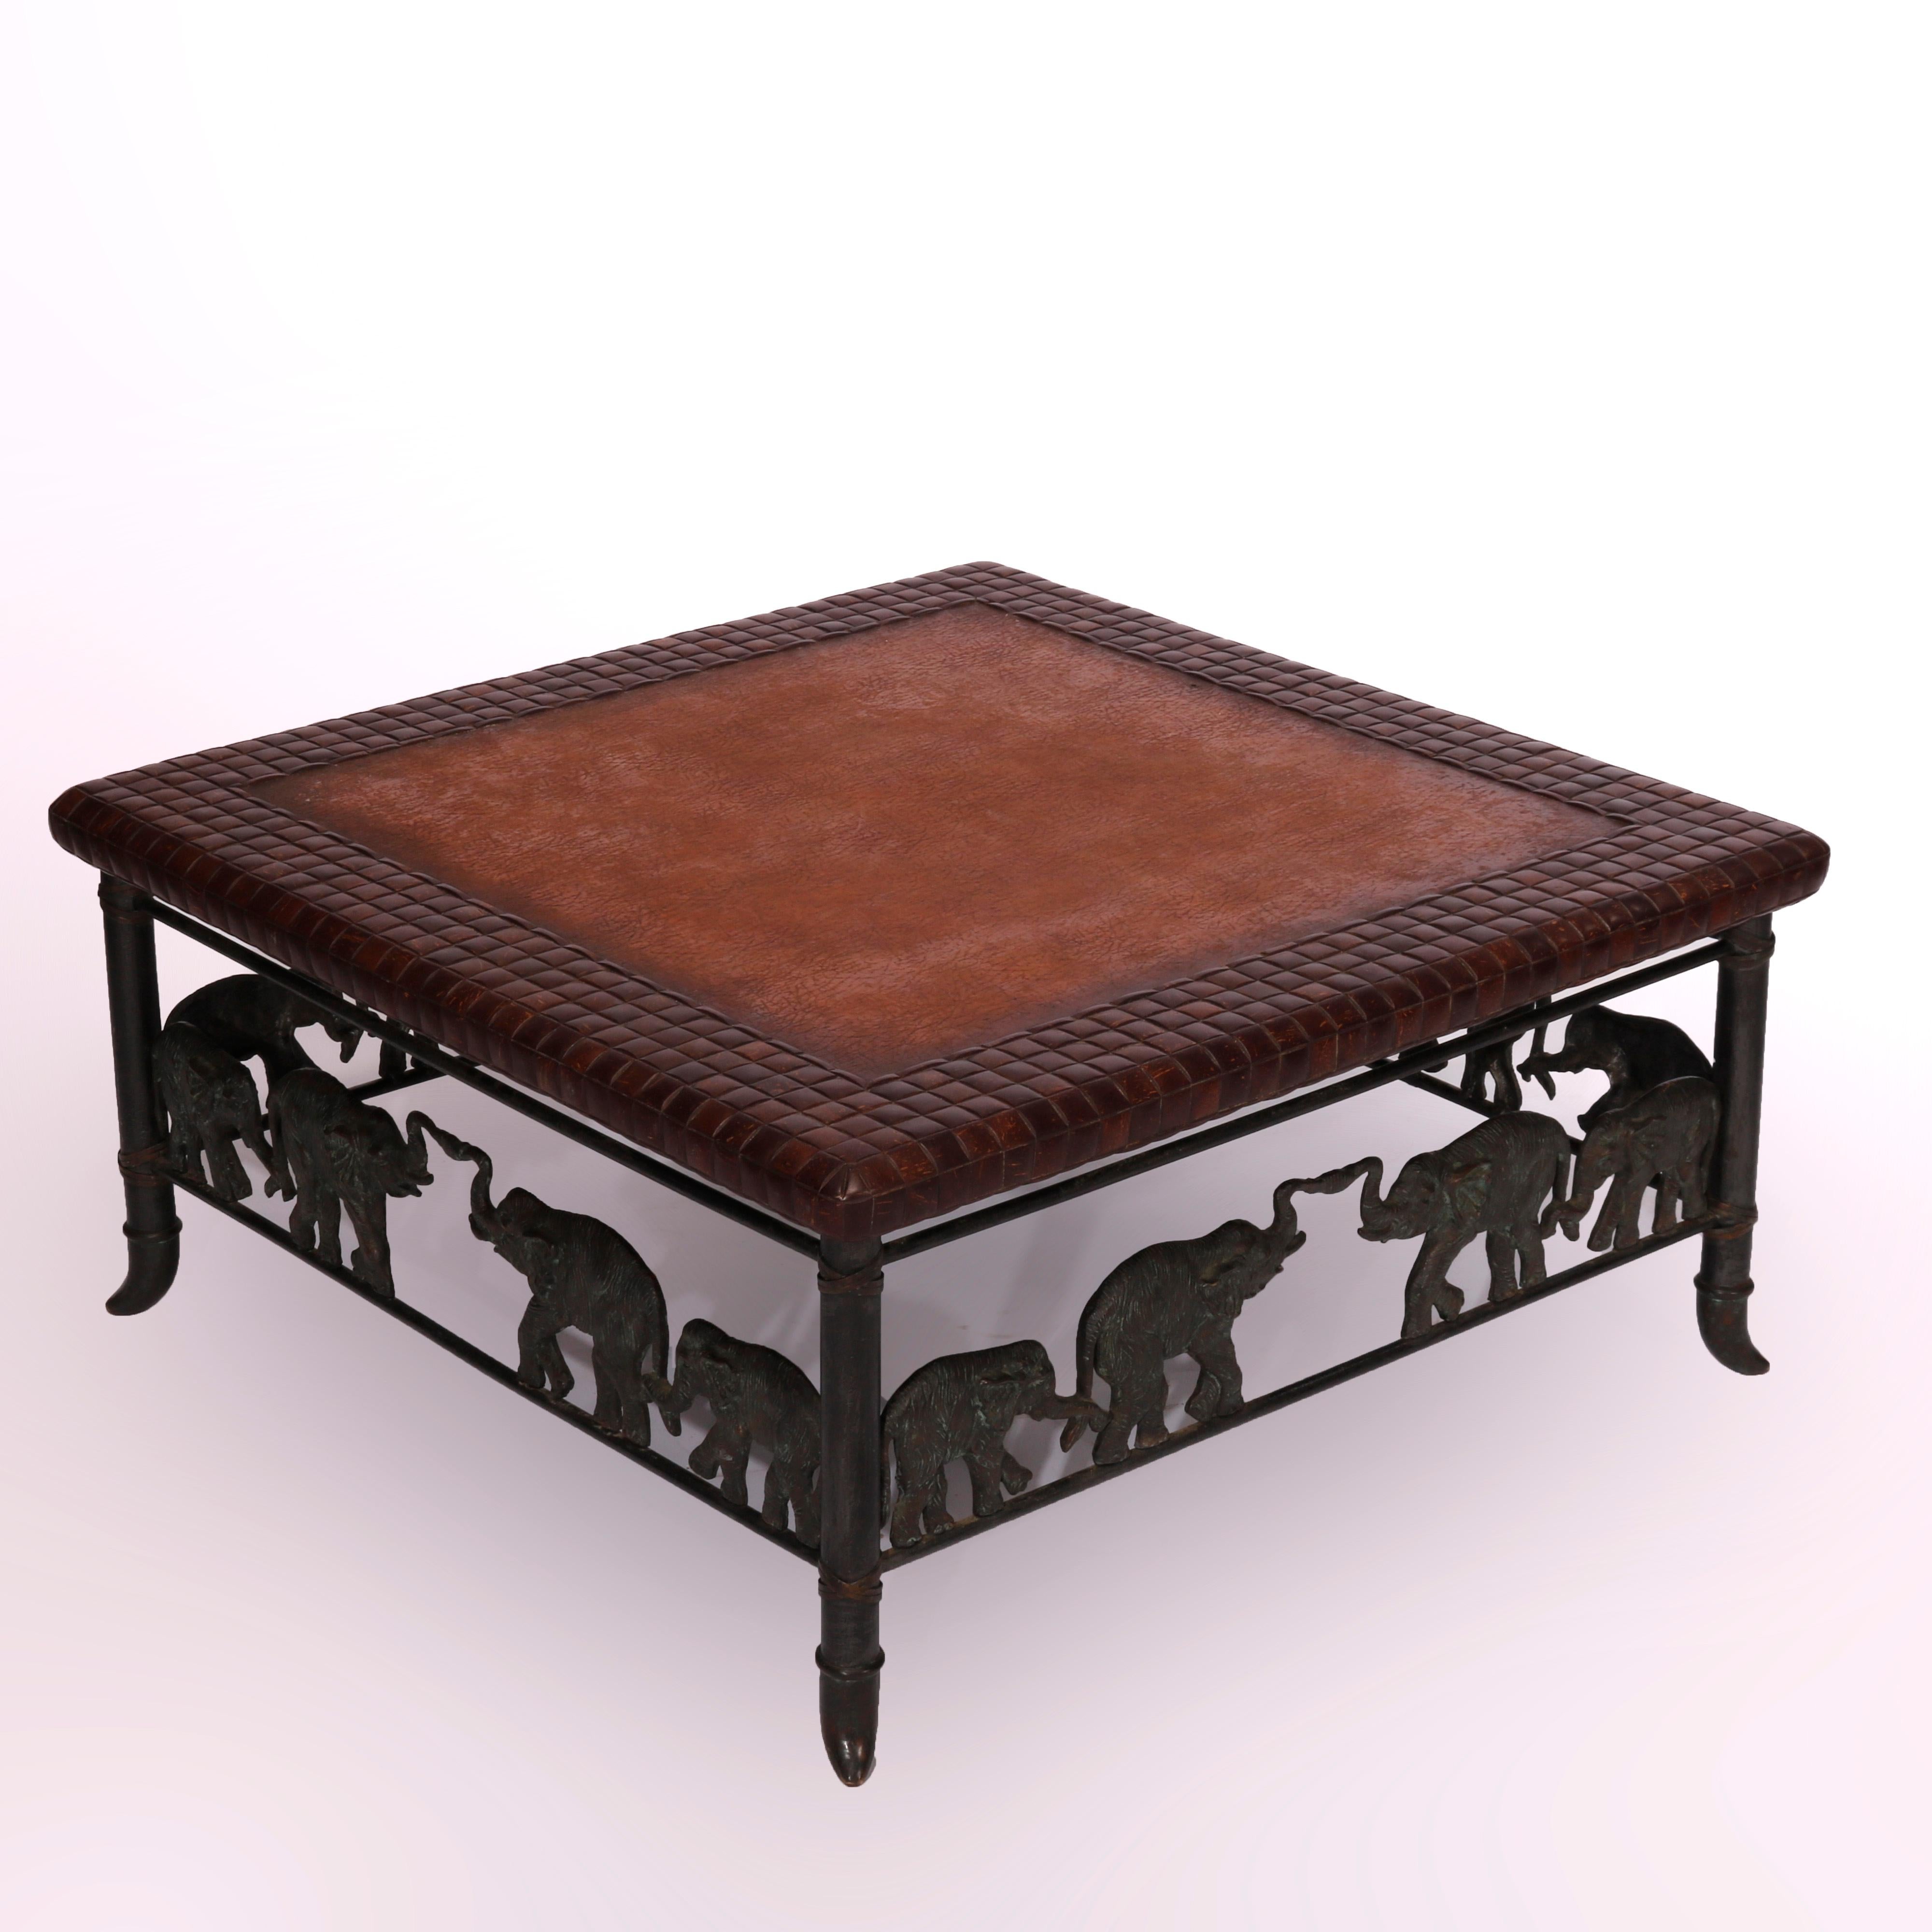 20th Century Maitland Smith Figural Elephant Bronze & Leather Coffee Table, 20th C